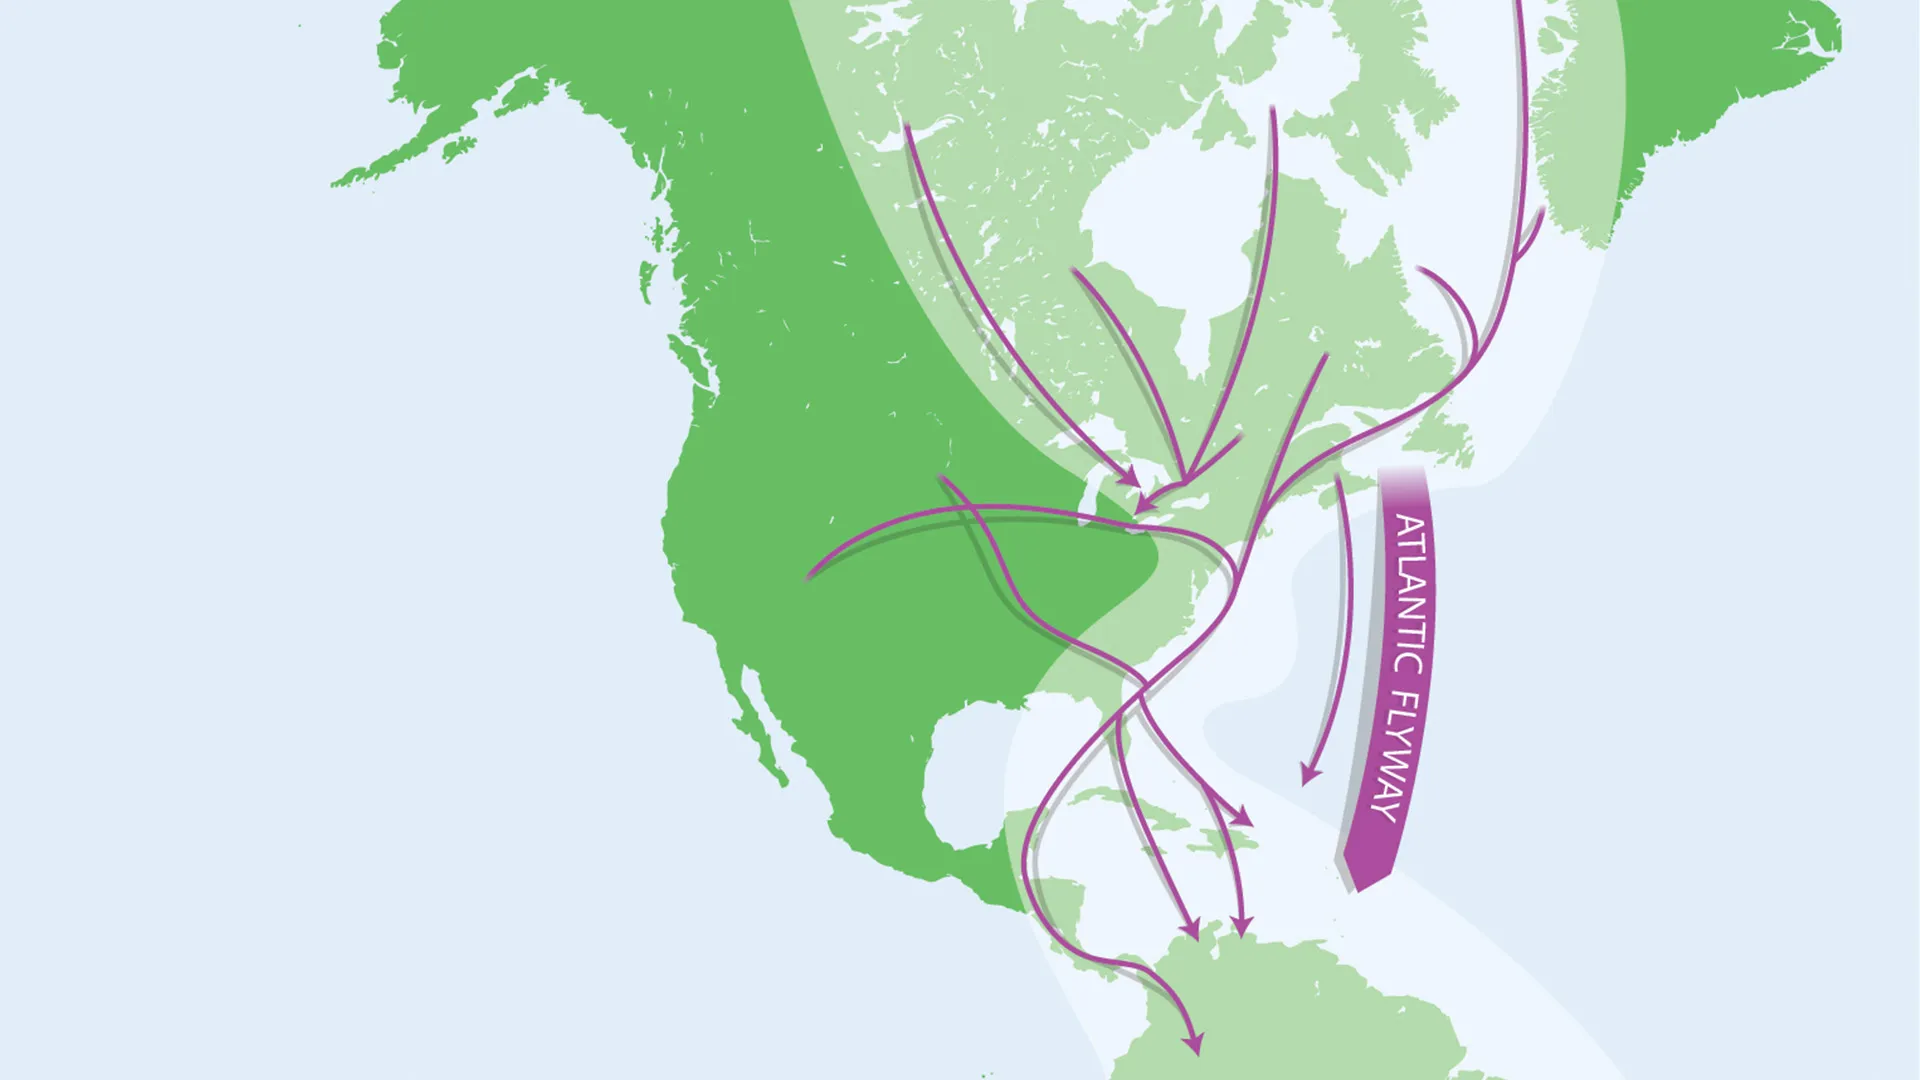 A graphic depicting the Atlantic Flyway. This path Crosses from Canada to South America, along the eastern coast of the United States.